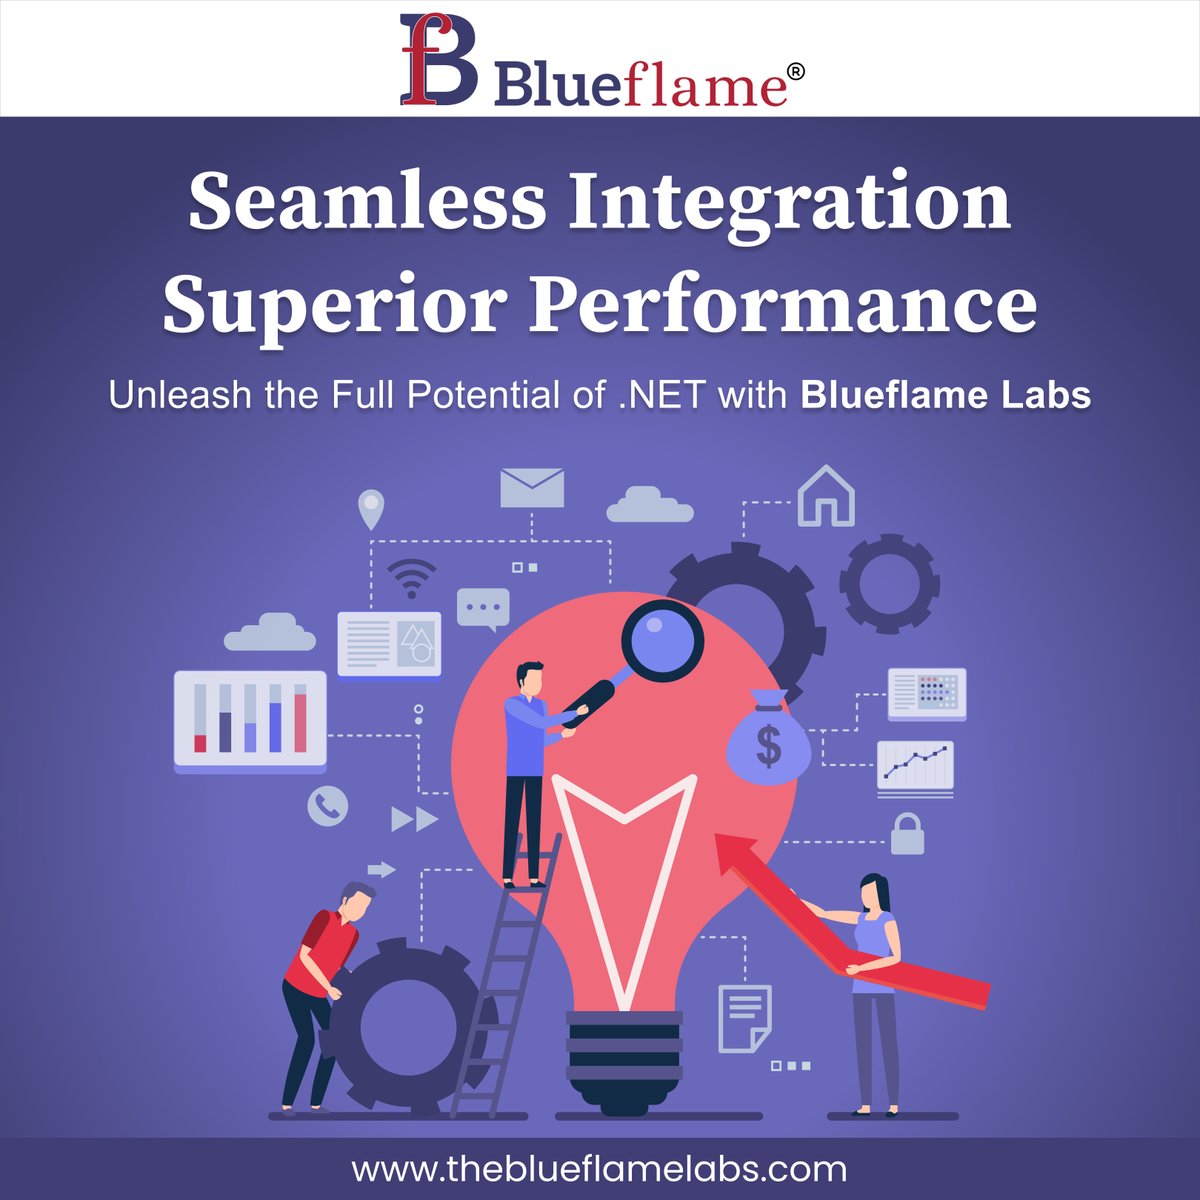 Tired of limitations? Blueflame Labs helps you unleash the full potential of .NET with seamless integration solutions. Optimize #performance, streamline #workflows, and innovate fearlessly. theblueflamelabs.com

#blueflamelabs #microsoft #microsoftpartner #development #dotnet